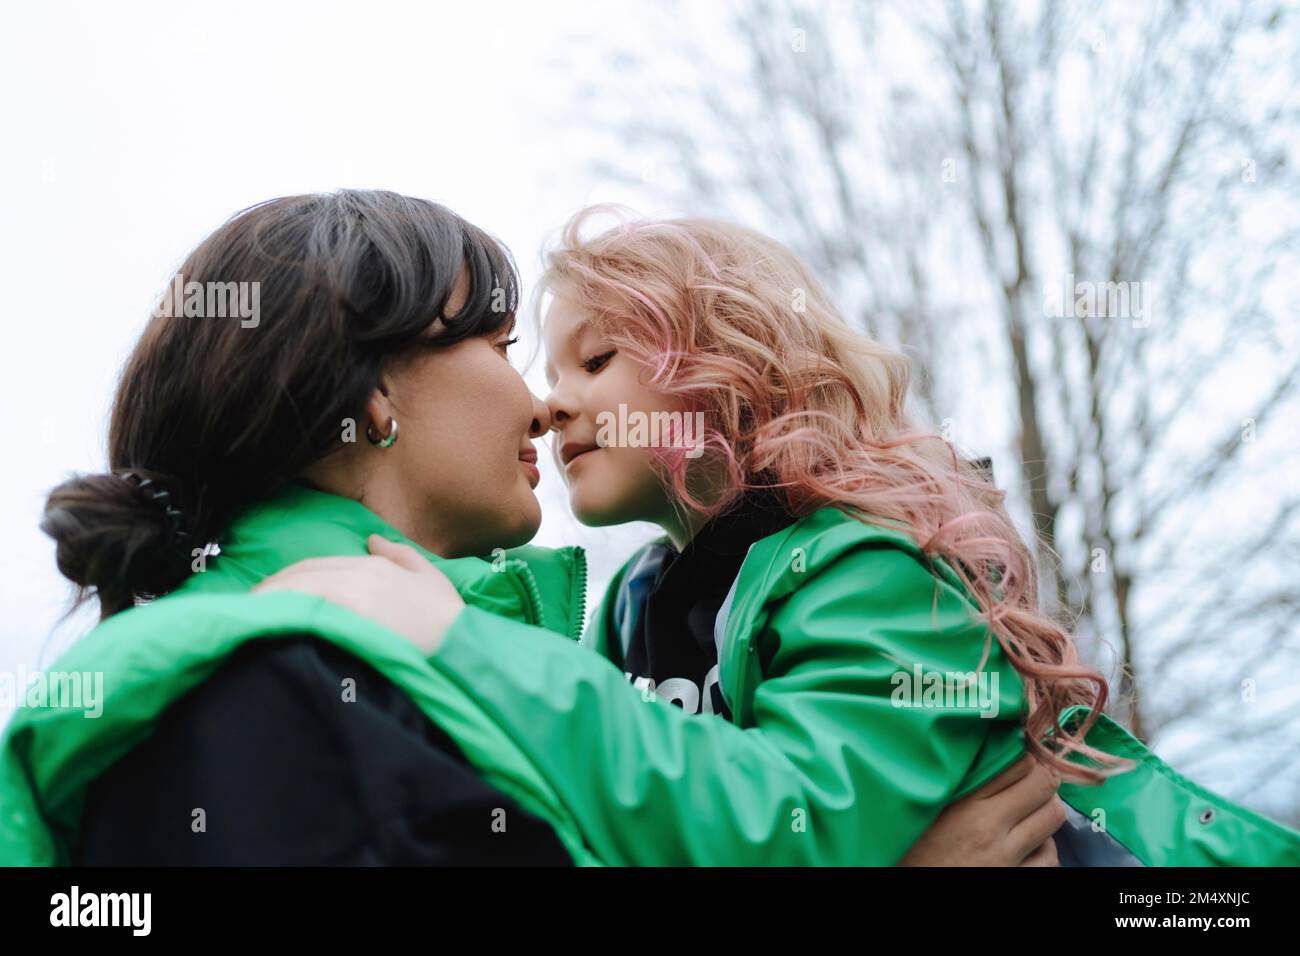 Mother embracing daughter with pink hair at park Stock Photo